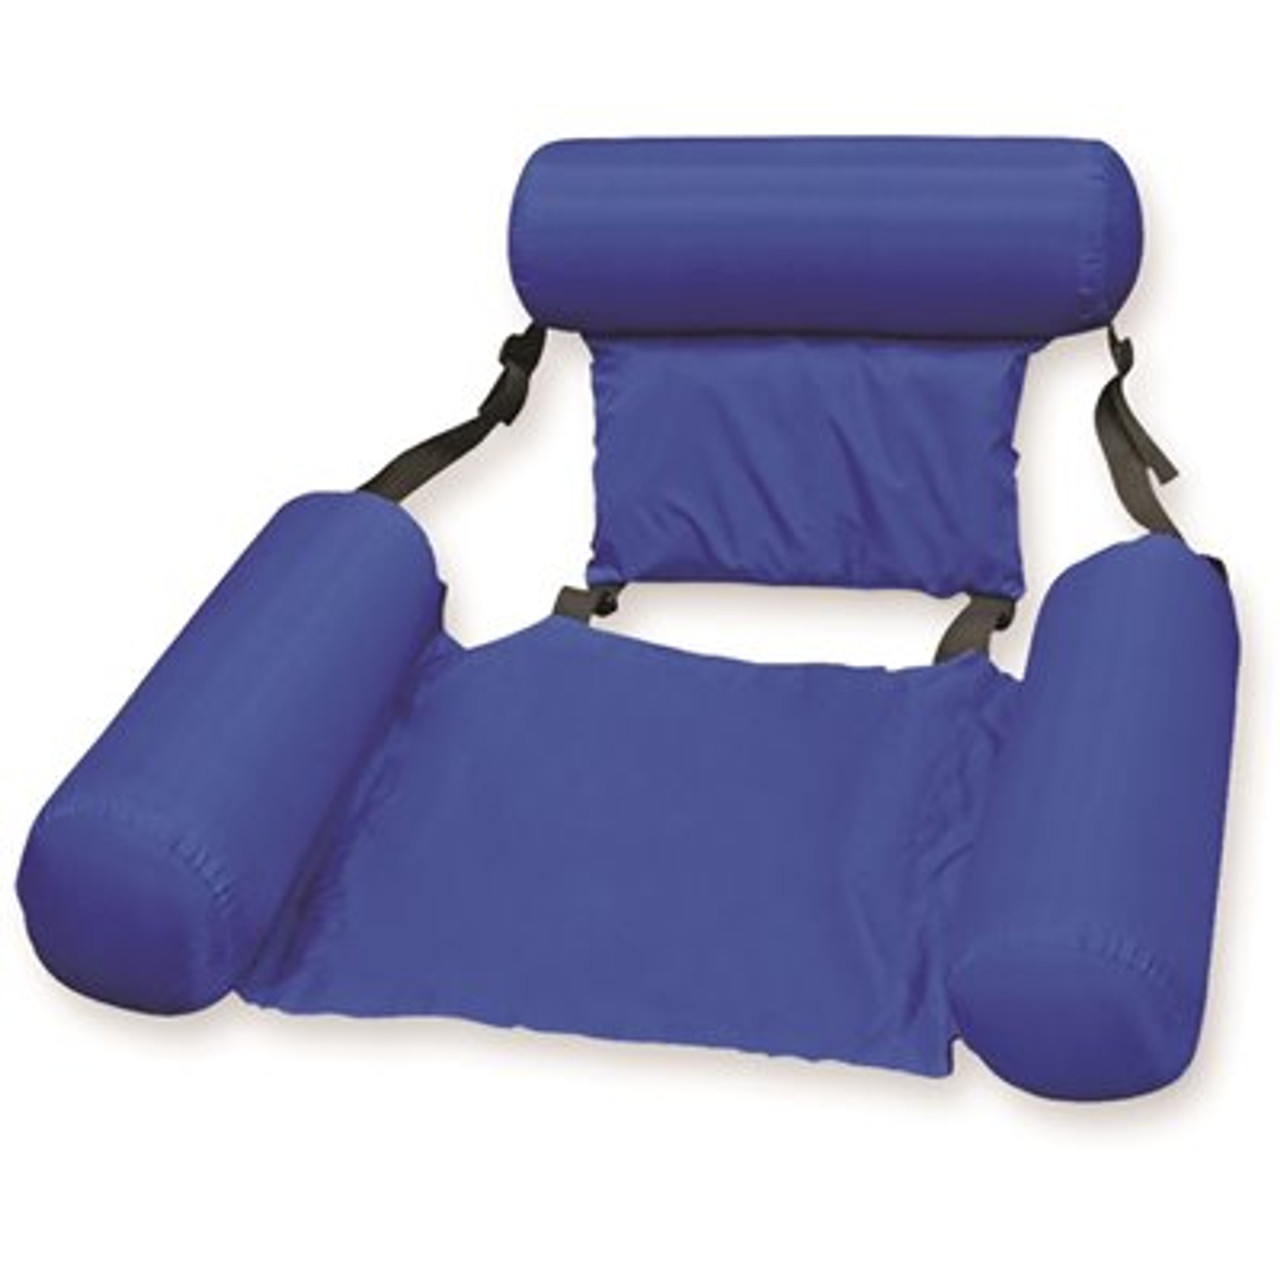 Poolmaster Fabric Swimming Pool Float Water Chair Lounger